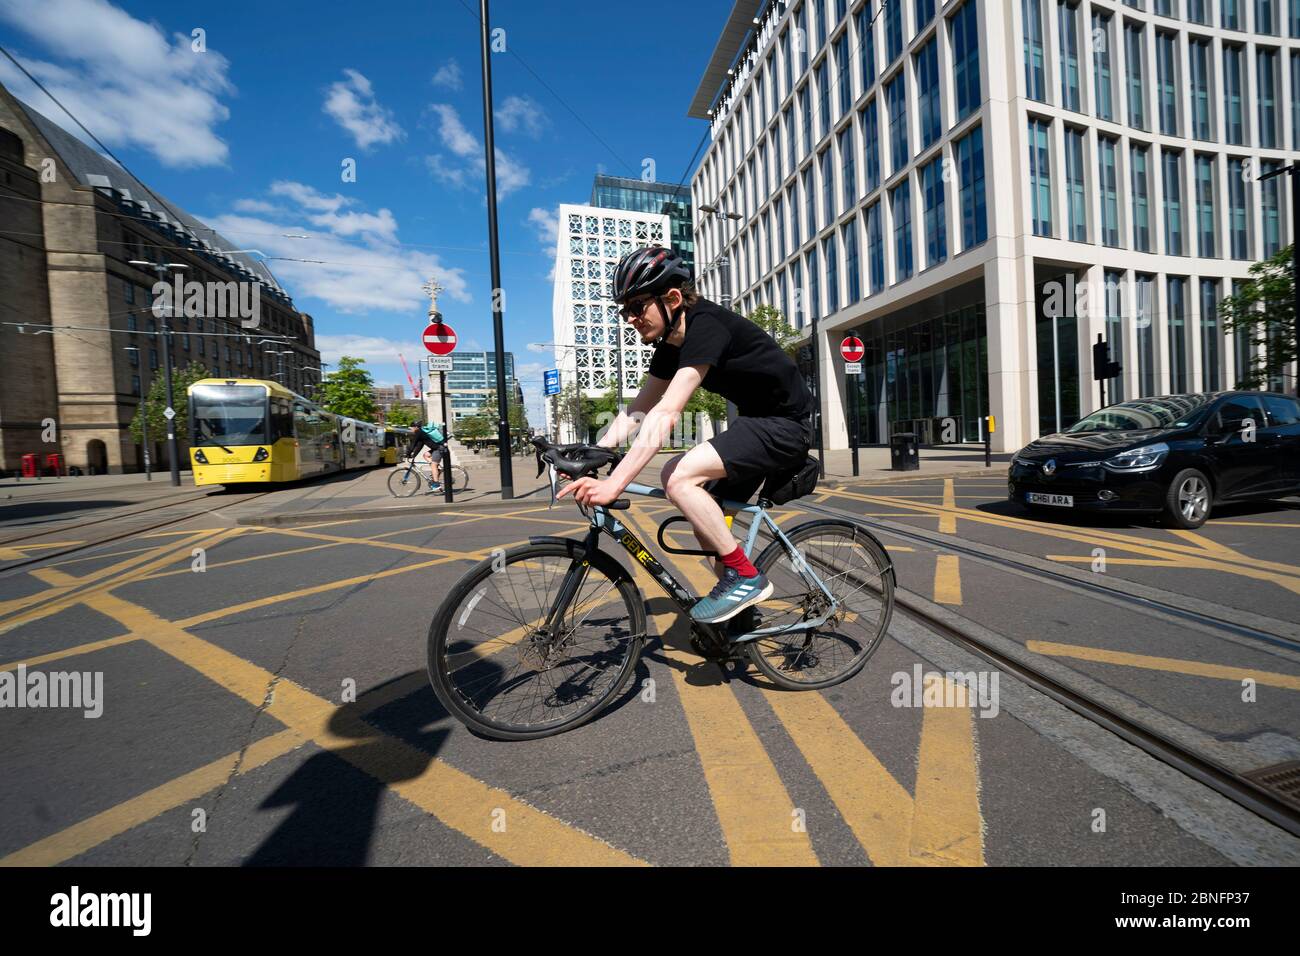 Manchester, Britain. 14th May, 2020. A man rides a bicycle in Manchester, Britain, on May 14, 2020. British Transport Secretary Grant Shapps on May 9 announced a 2-billion-pound (2.5-billion-U.S.-dolar) package to encourage cycling and walking amid the COVID-19 pandemic as another 346 patients have died in the country. The move came as the government strives to double cycling and increase walking by 2025 with a national cycling plan being expected to be published in June. Credit: Jon Super/Xinhua/Alamy Live News Stock Photo